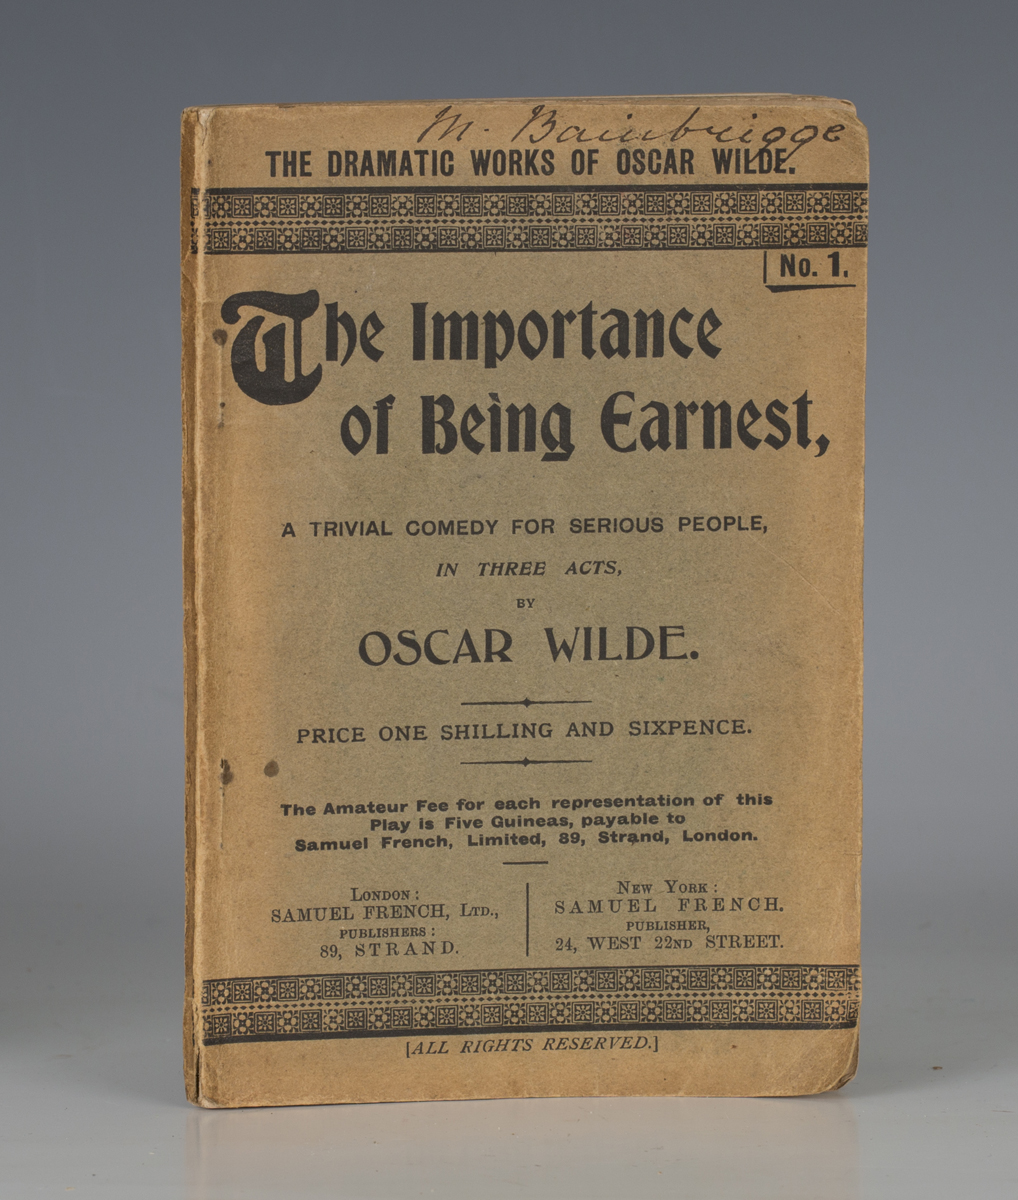 WILDE, Oscar. The Importance of Being Earnest. London and New York: Samuel French Ltd., [circa